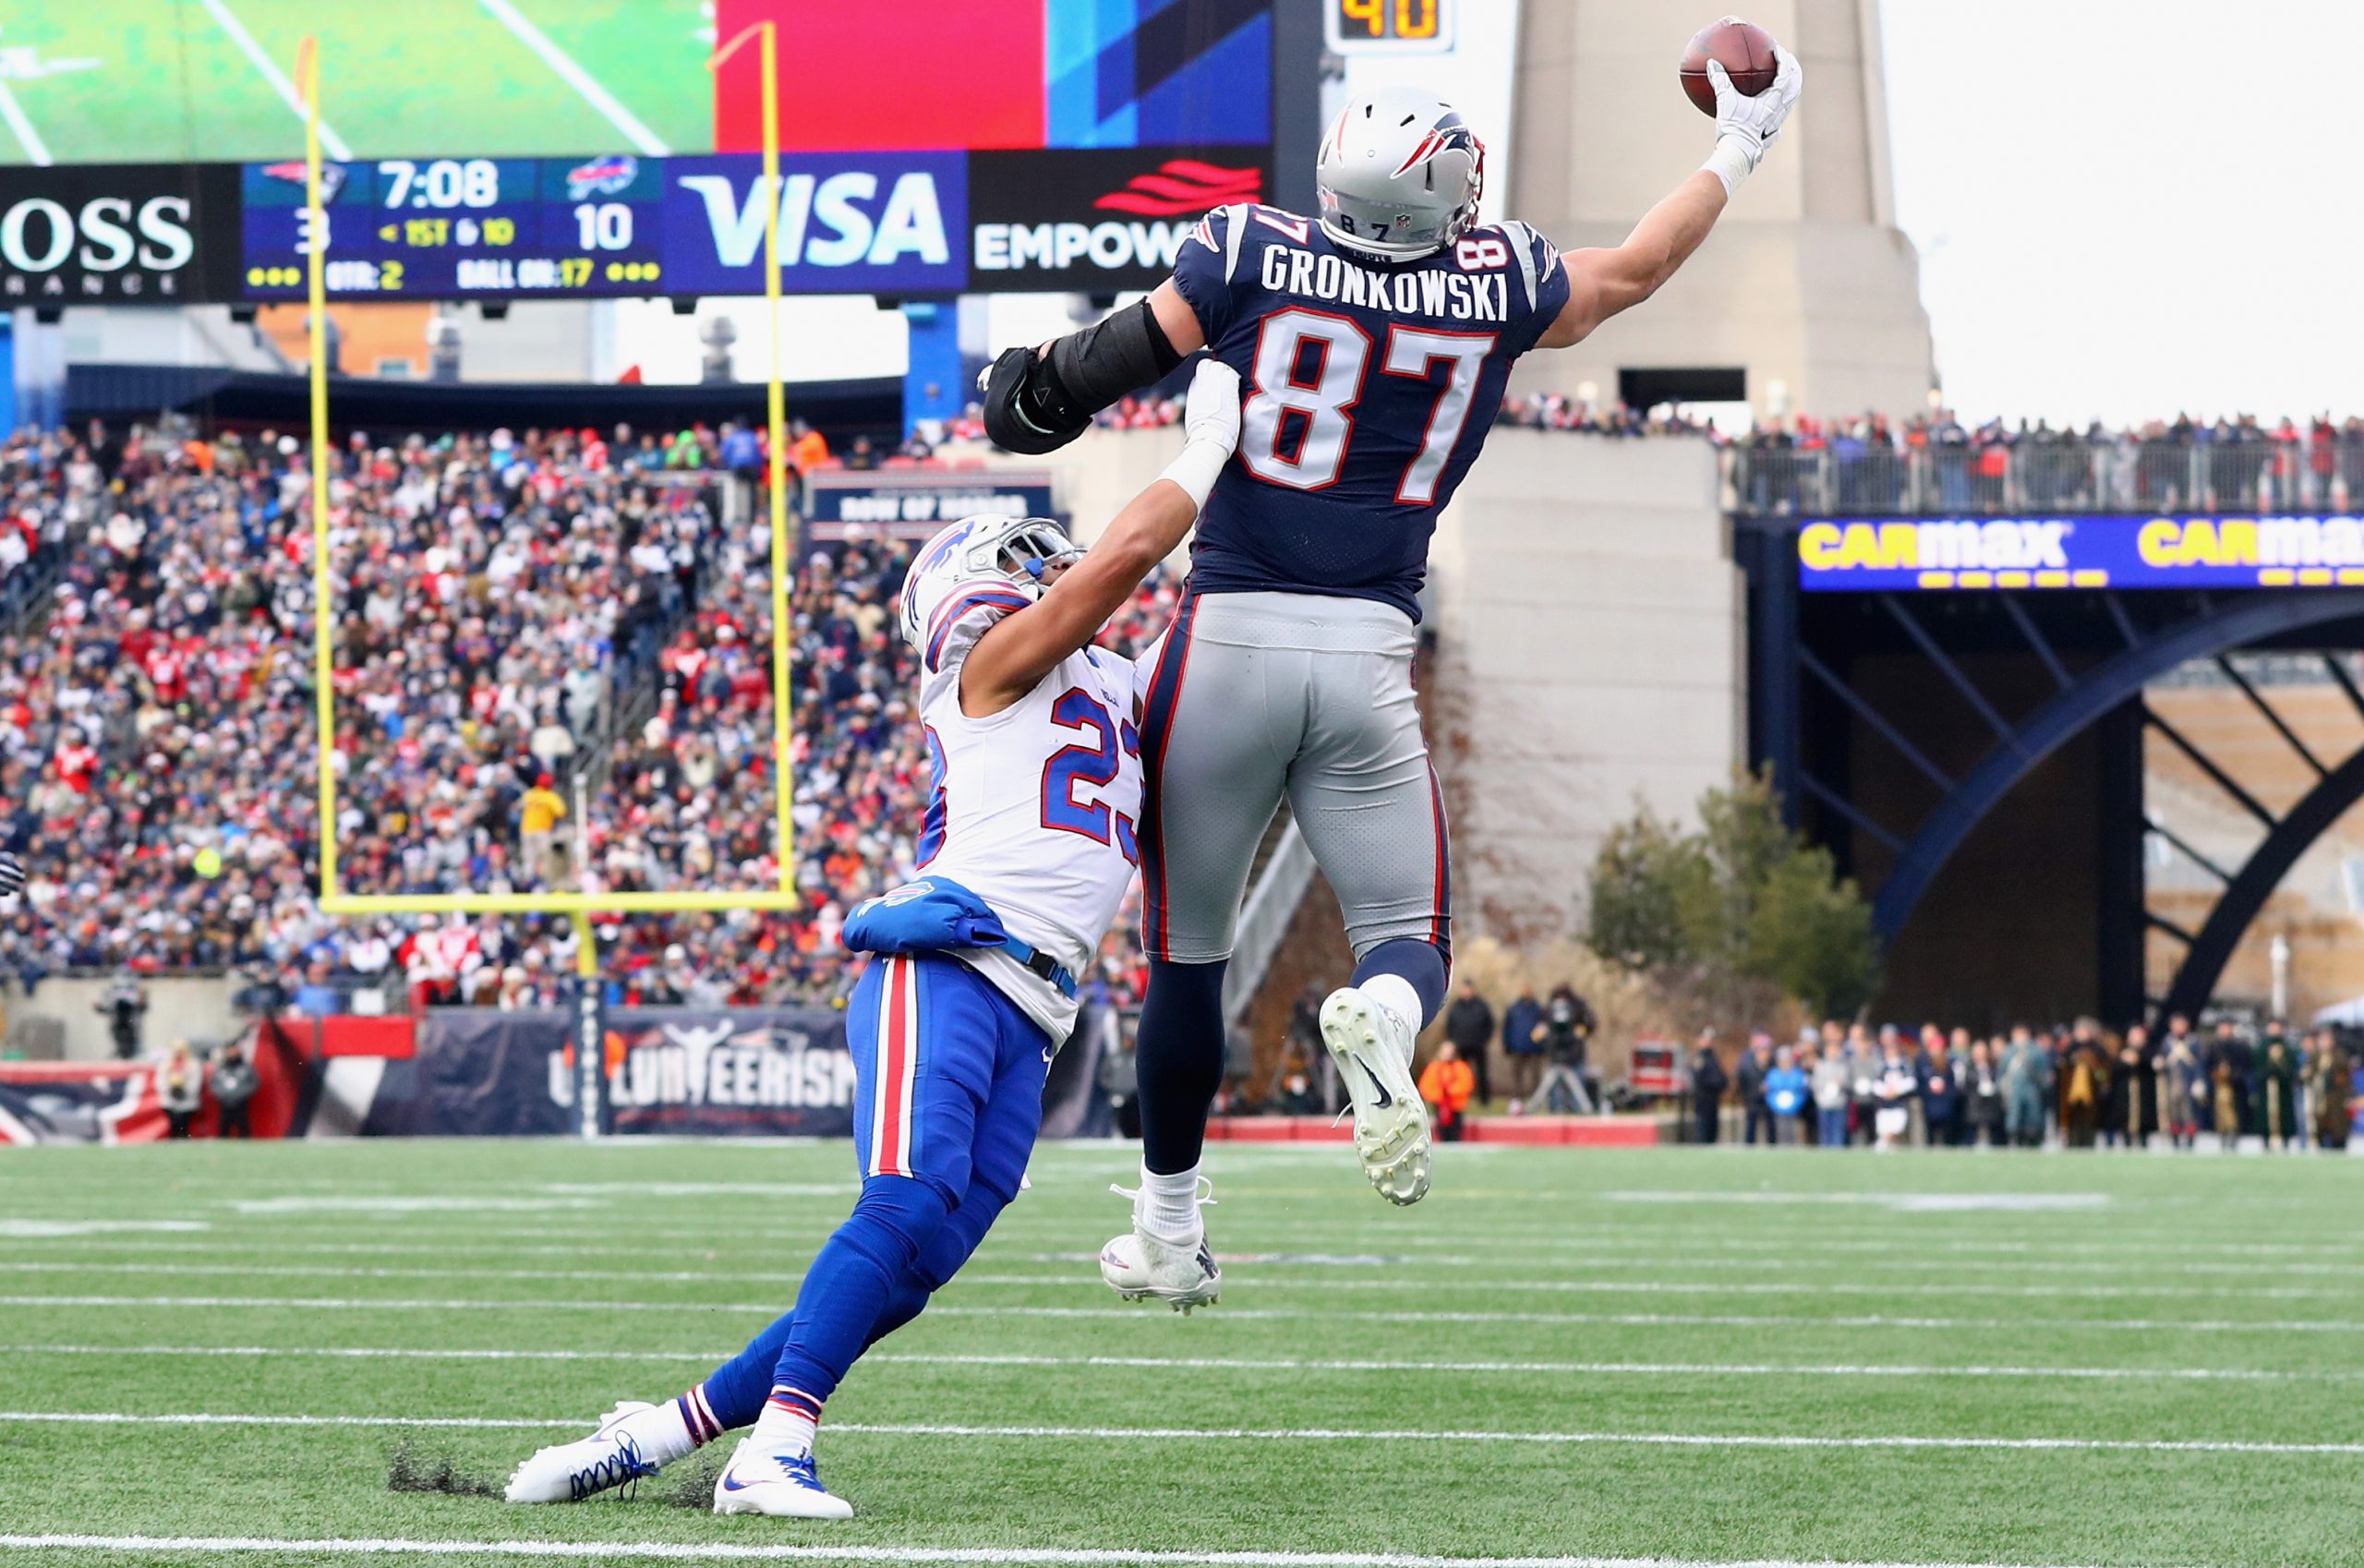 Rob Gronkowski of the New England Patriots catches a touchdown pass.